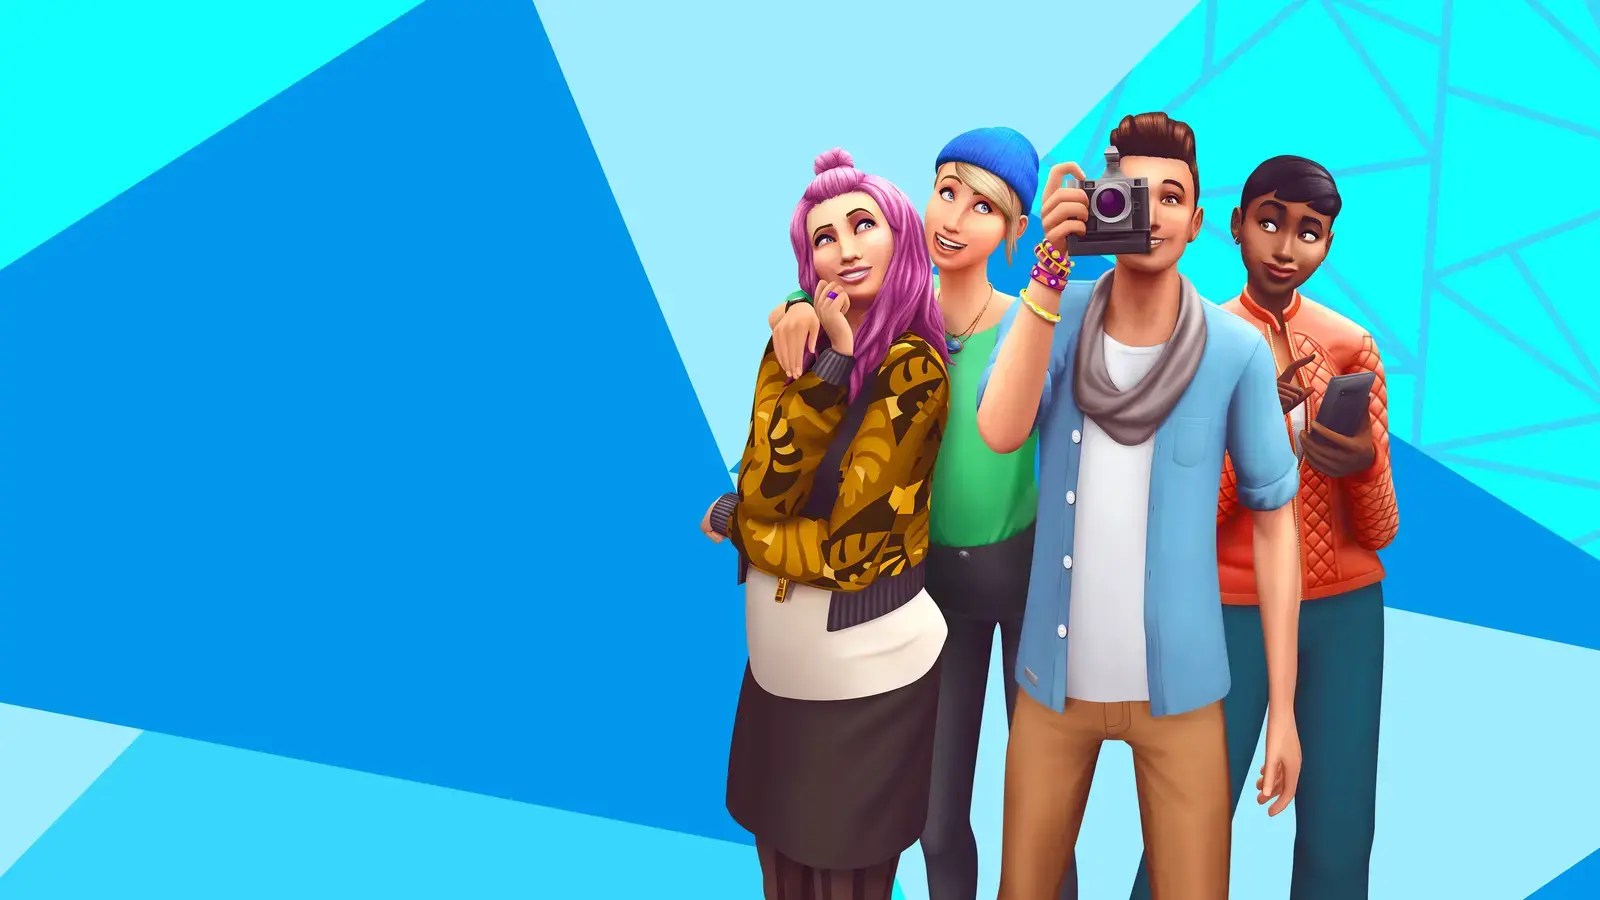 bryan baumgart recommends Sims 4 Kinky World